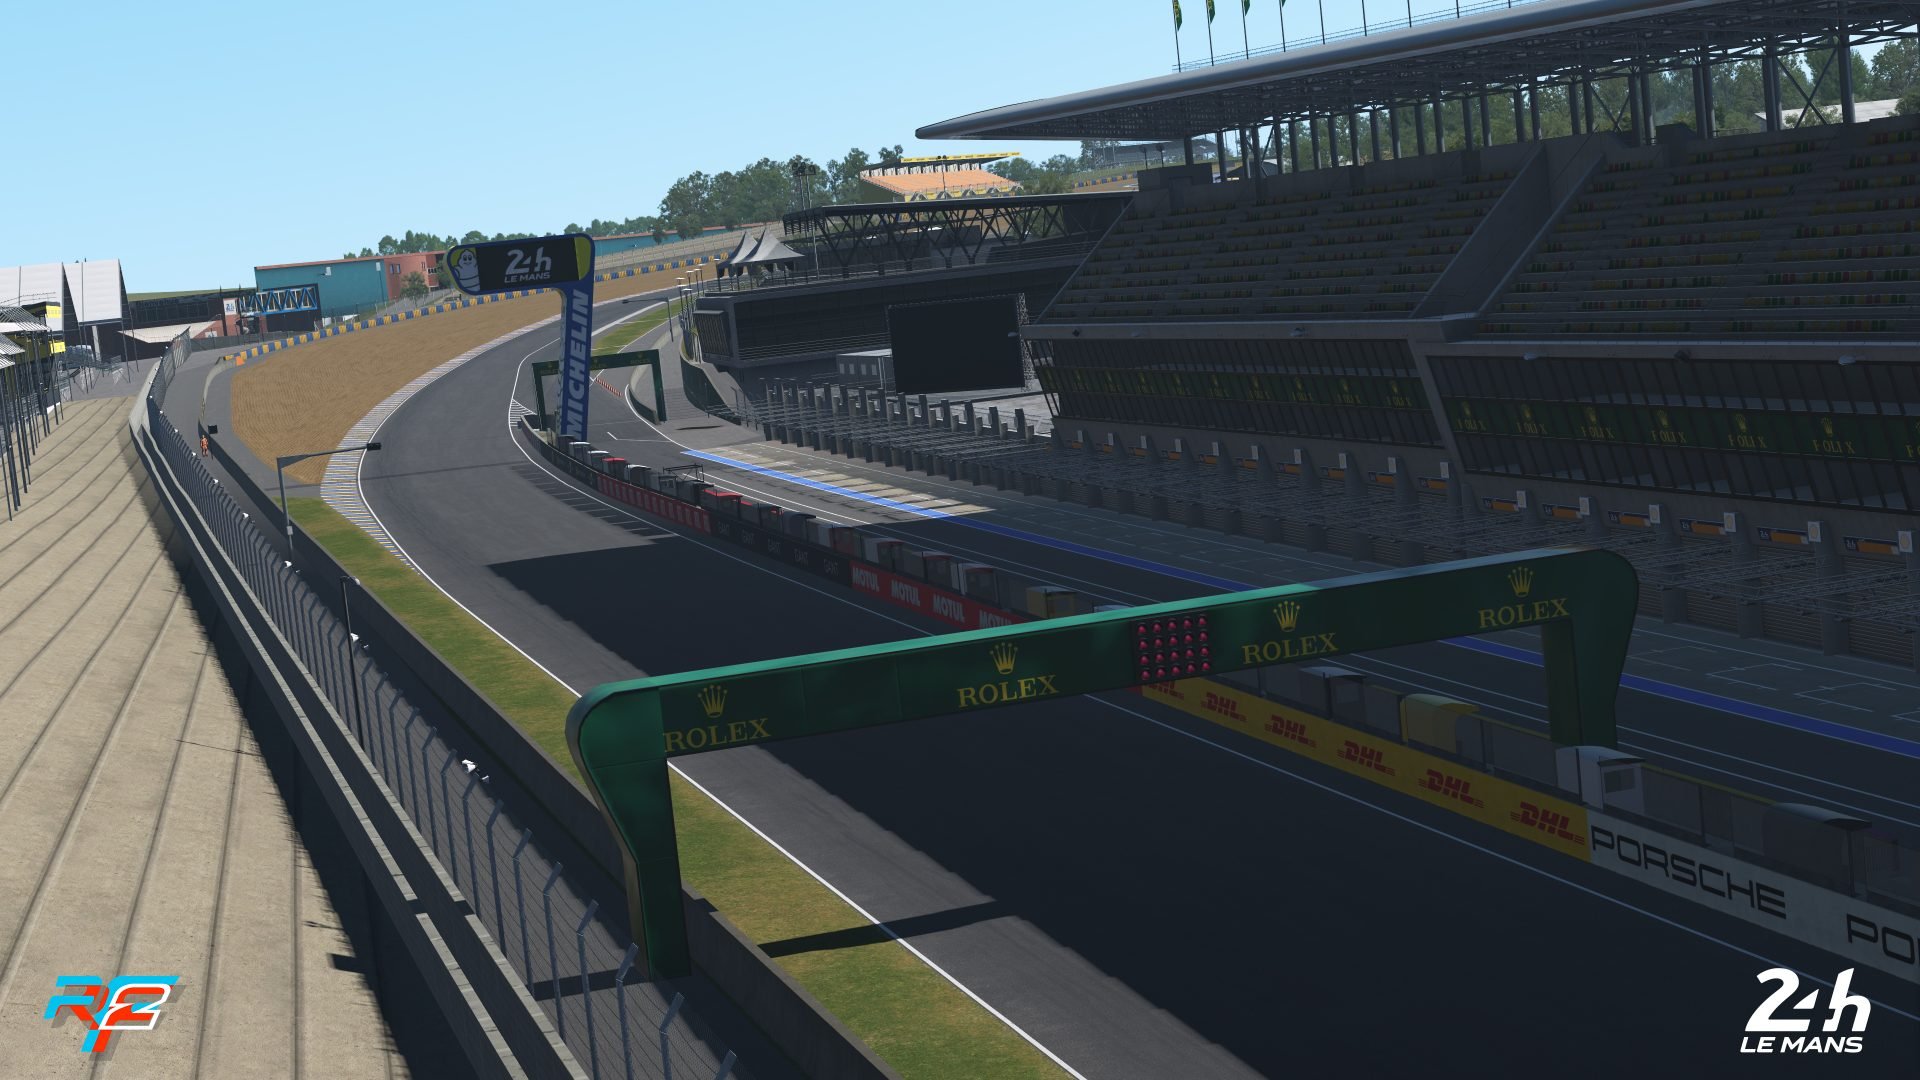 More information about "rFactor 2: Le Mans 24H e nuova build by Studio 397 disponibili"